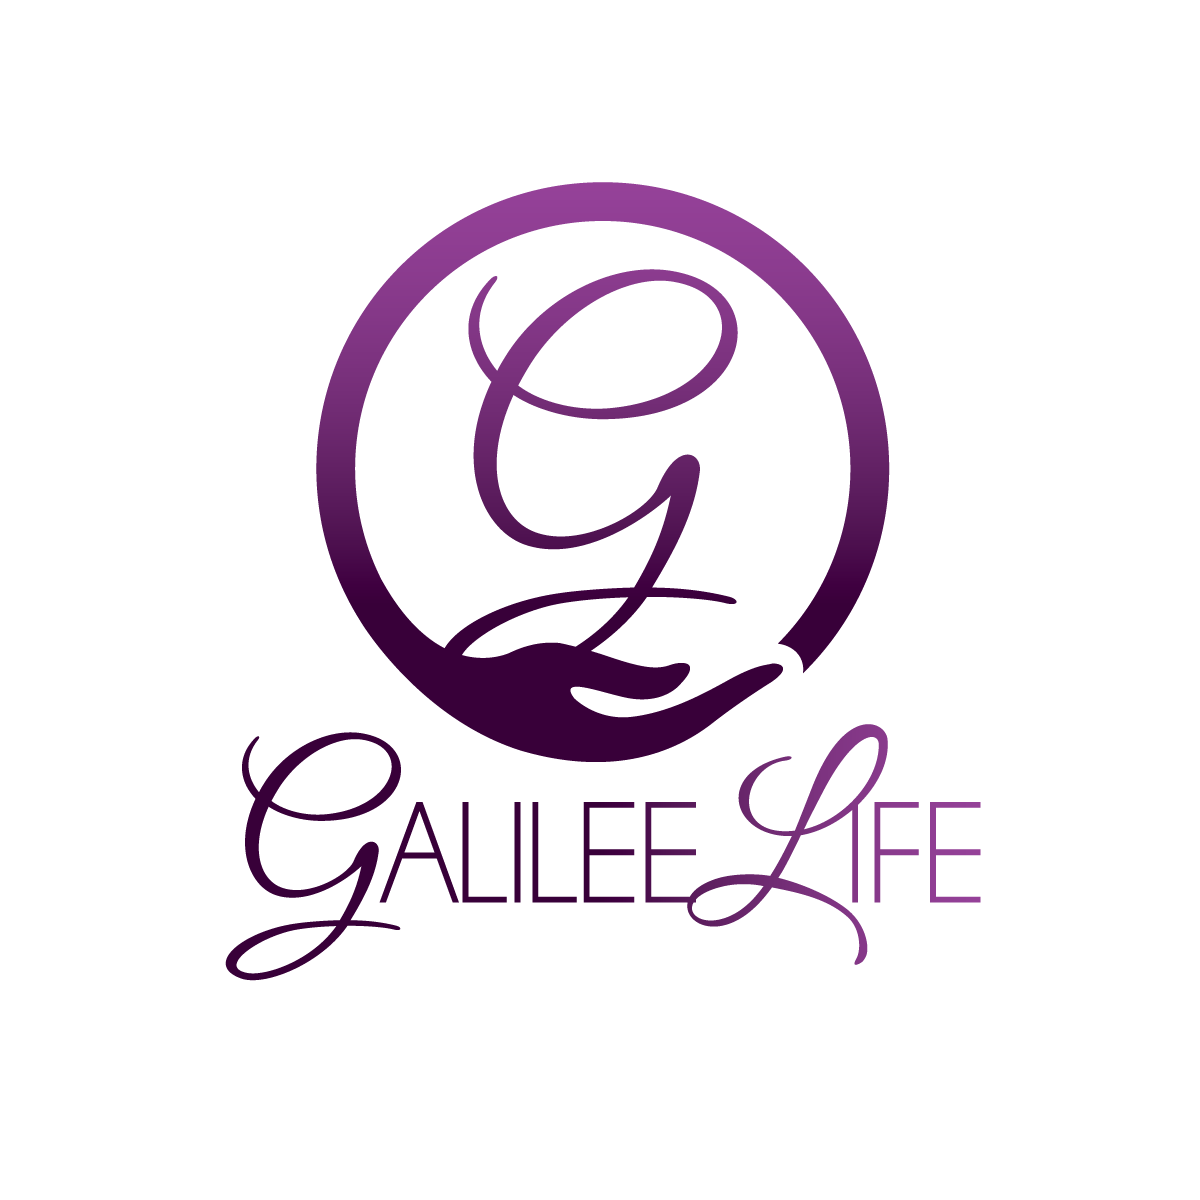 Galilee Life - The home for vendors and businesses of any caliber launches two magazines annually.